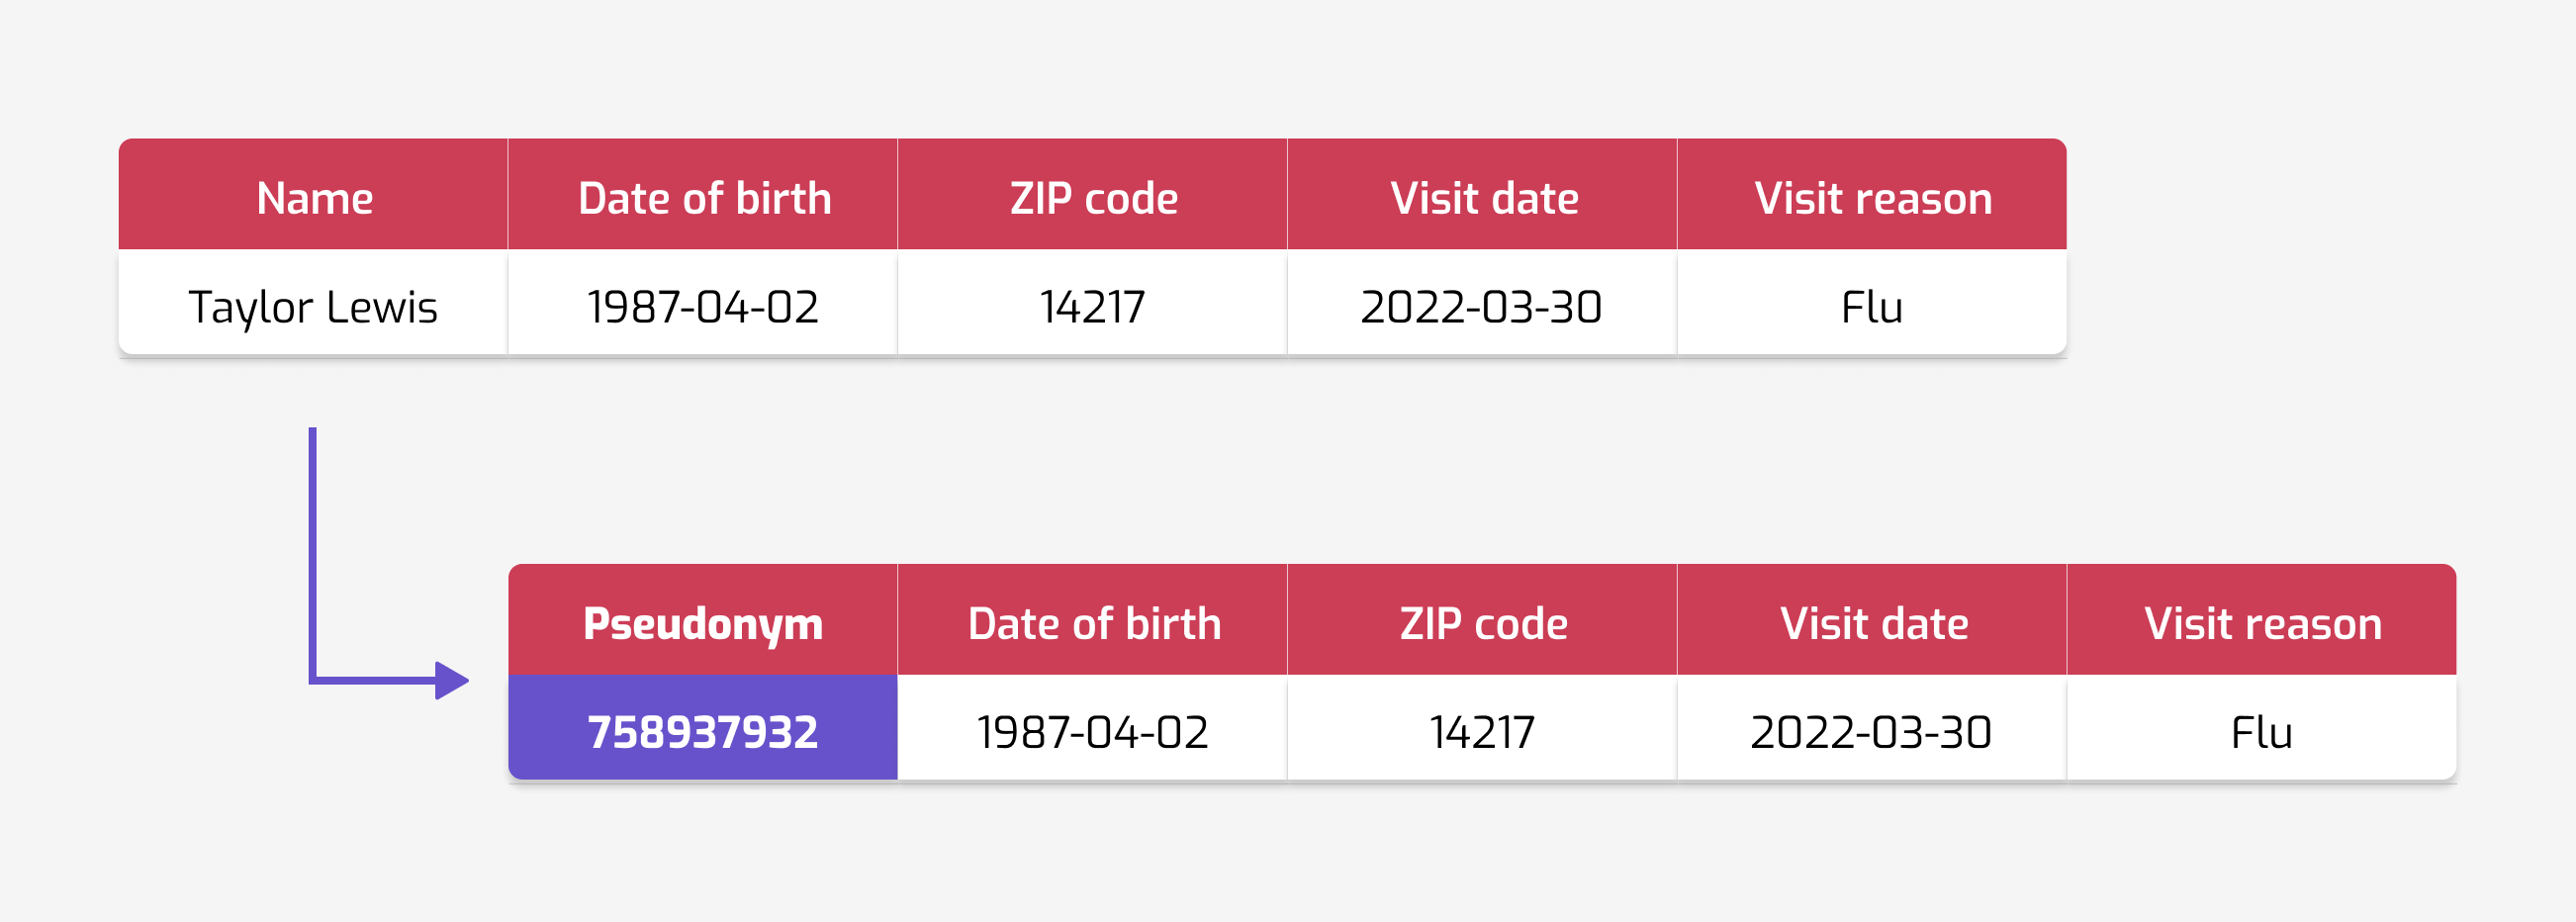 A diagram showing the process of randomizing identifiers. A table has headers
Name, Date of birth, ZIP code, Visit date, and Visit reason; a single row has
values Taylor Lewis, 1987, 14217, 2022-03-30, and Flu. An arrow goes from this
table to another table with the same columns headers and values, except the Name
column has been replaced with Pseudonym, and the pseudonym value is a string of
numbers.